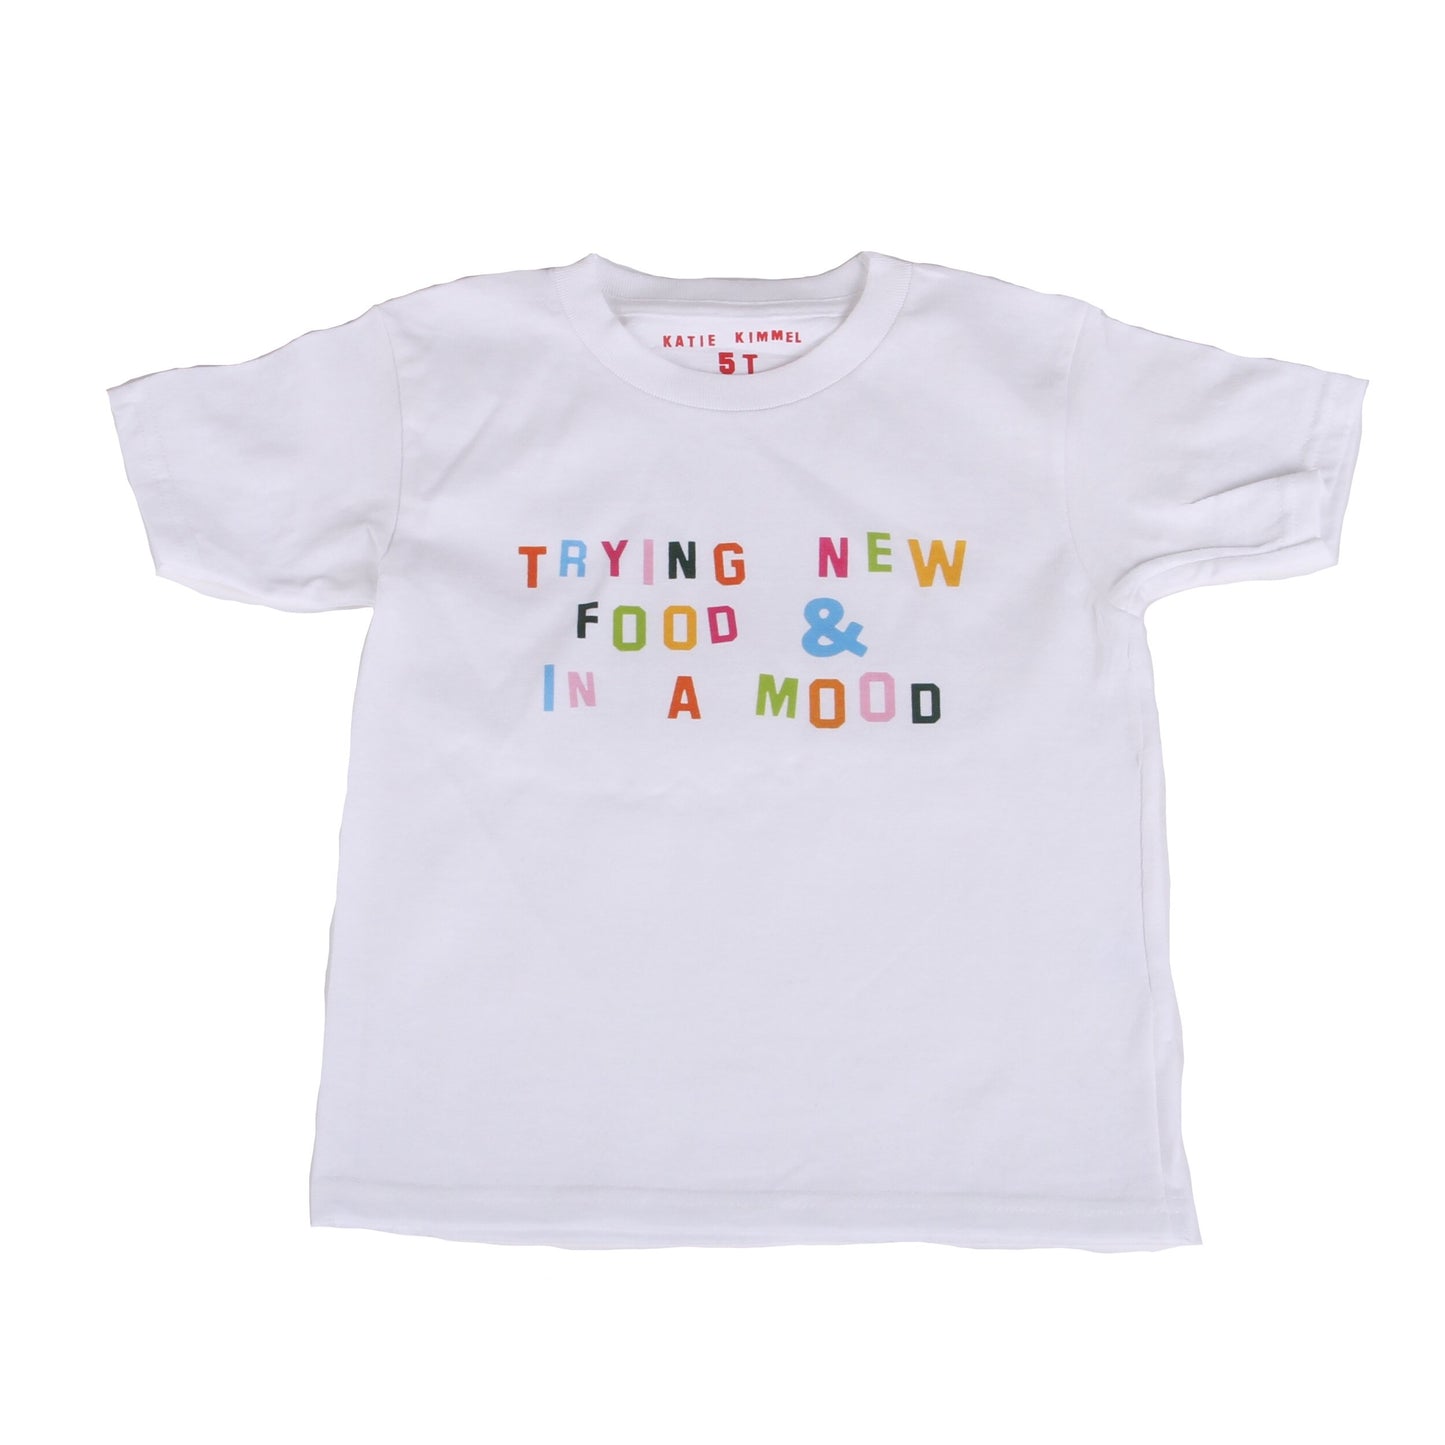 Kids t-shirt -- it reads "Trying New Food & In A Mood" 